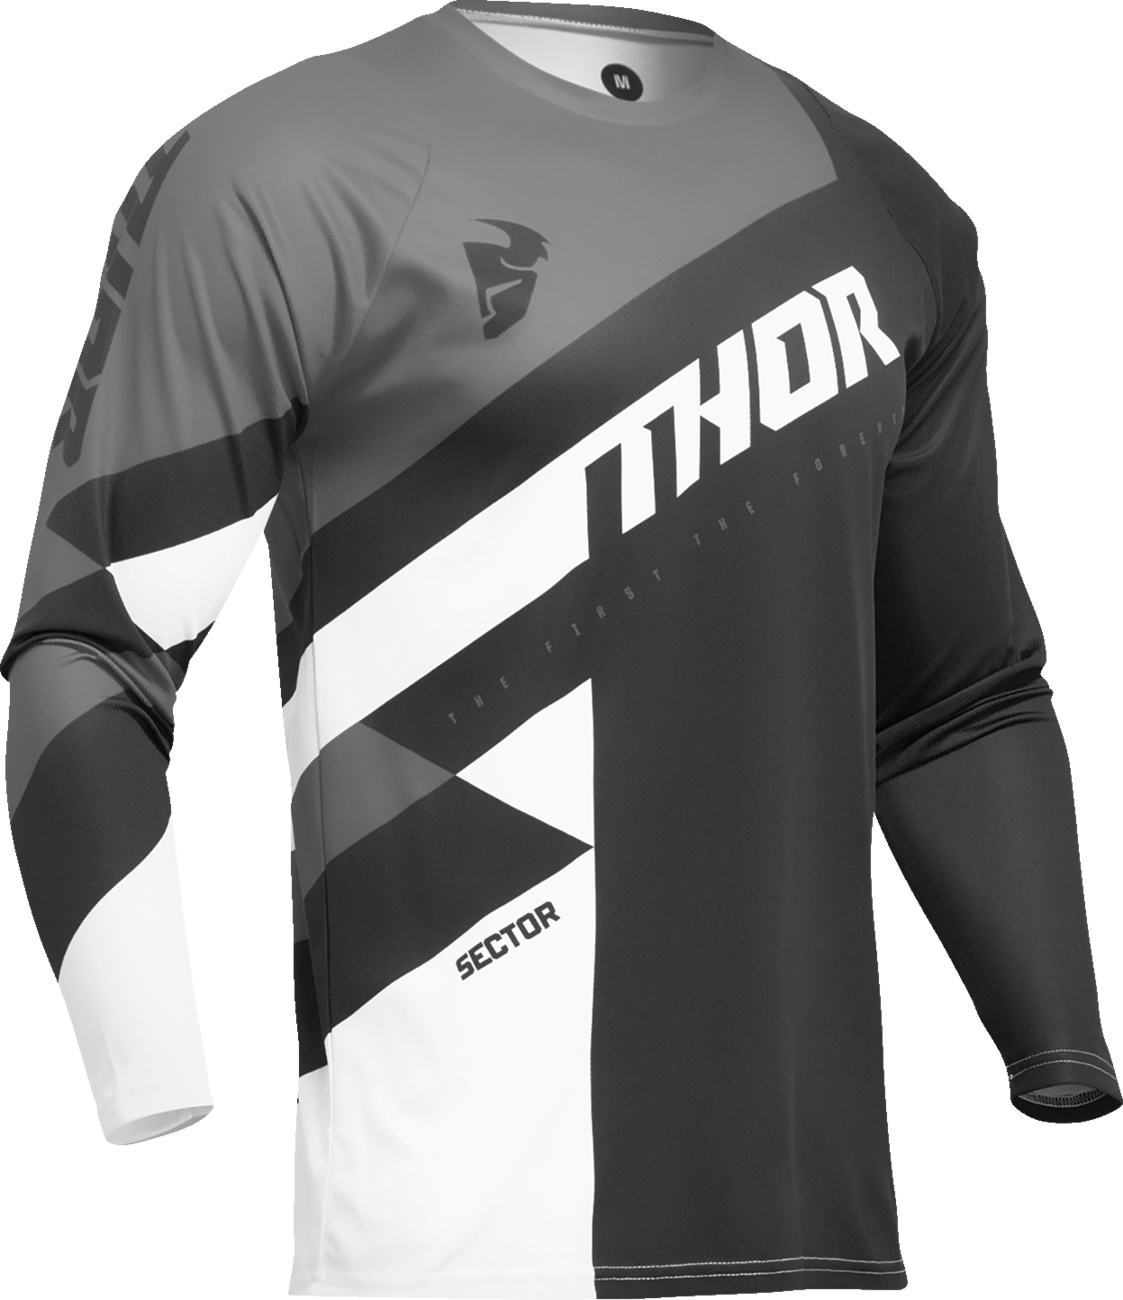 THOR Youth Sector Checker Jersey - Black/Gray - Small 2912-2408